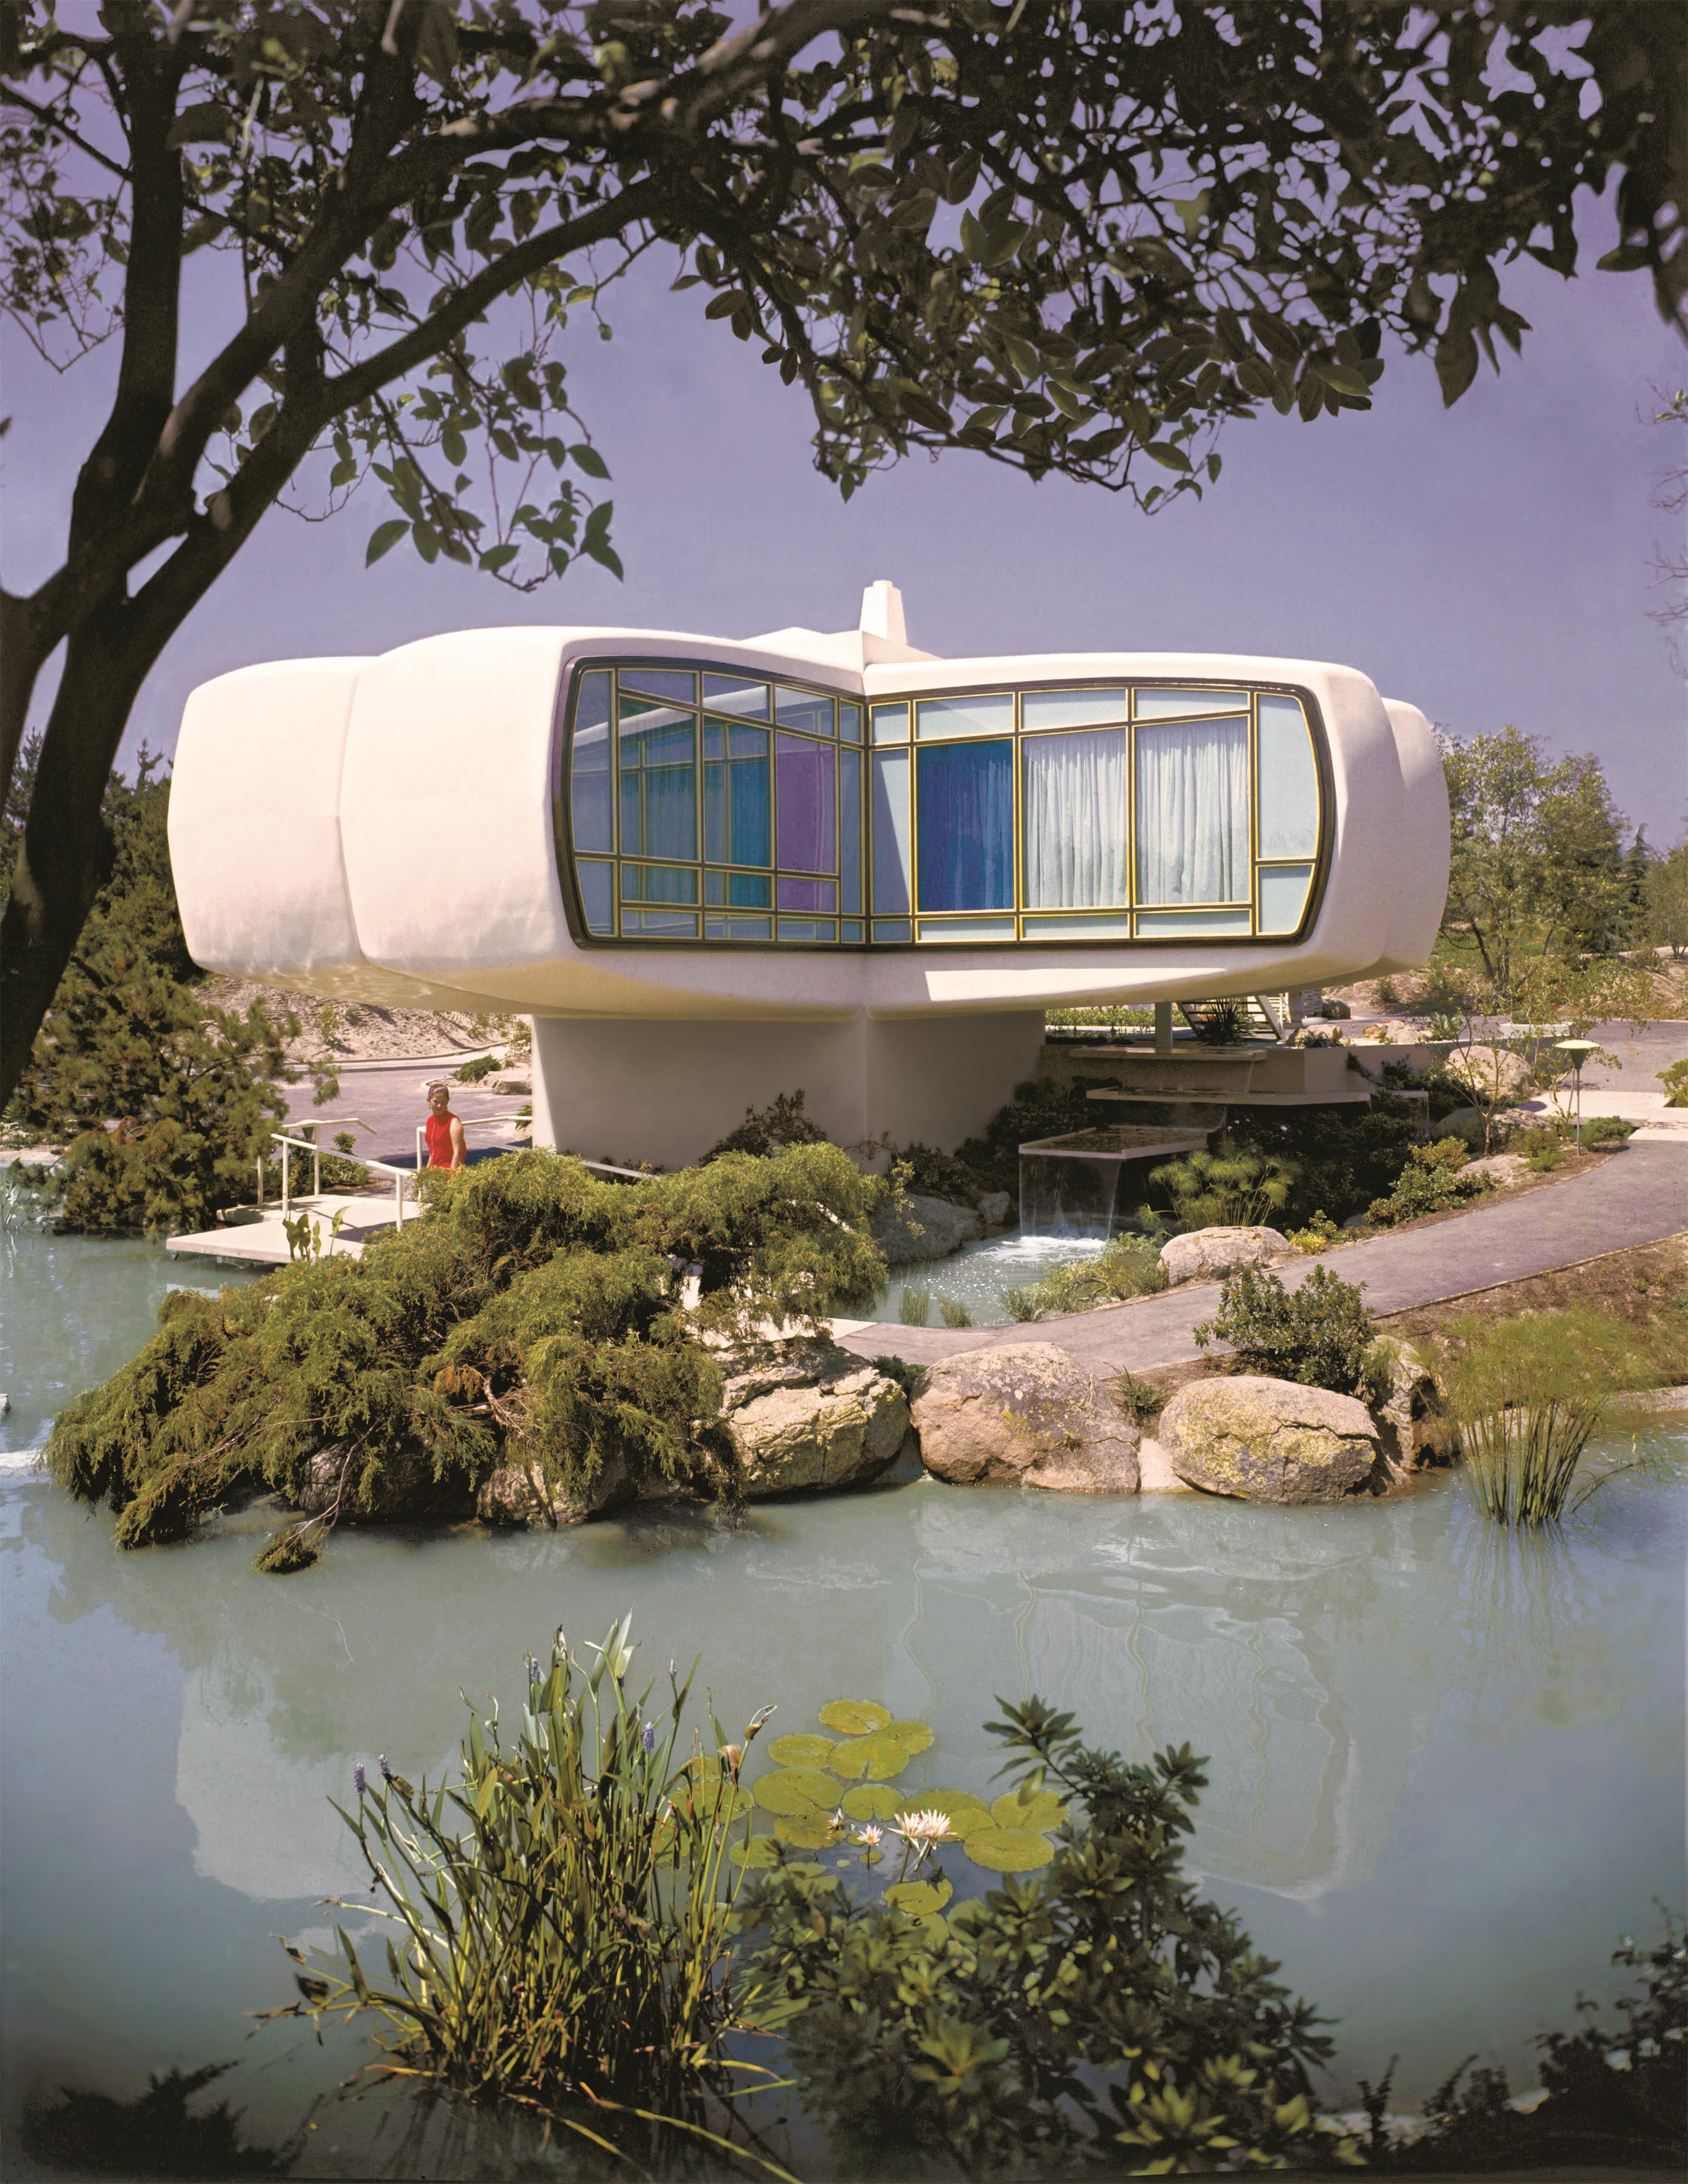 Imagining New Worlds: How Architecture Has Dreamt Of Utopia